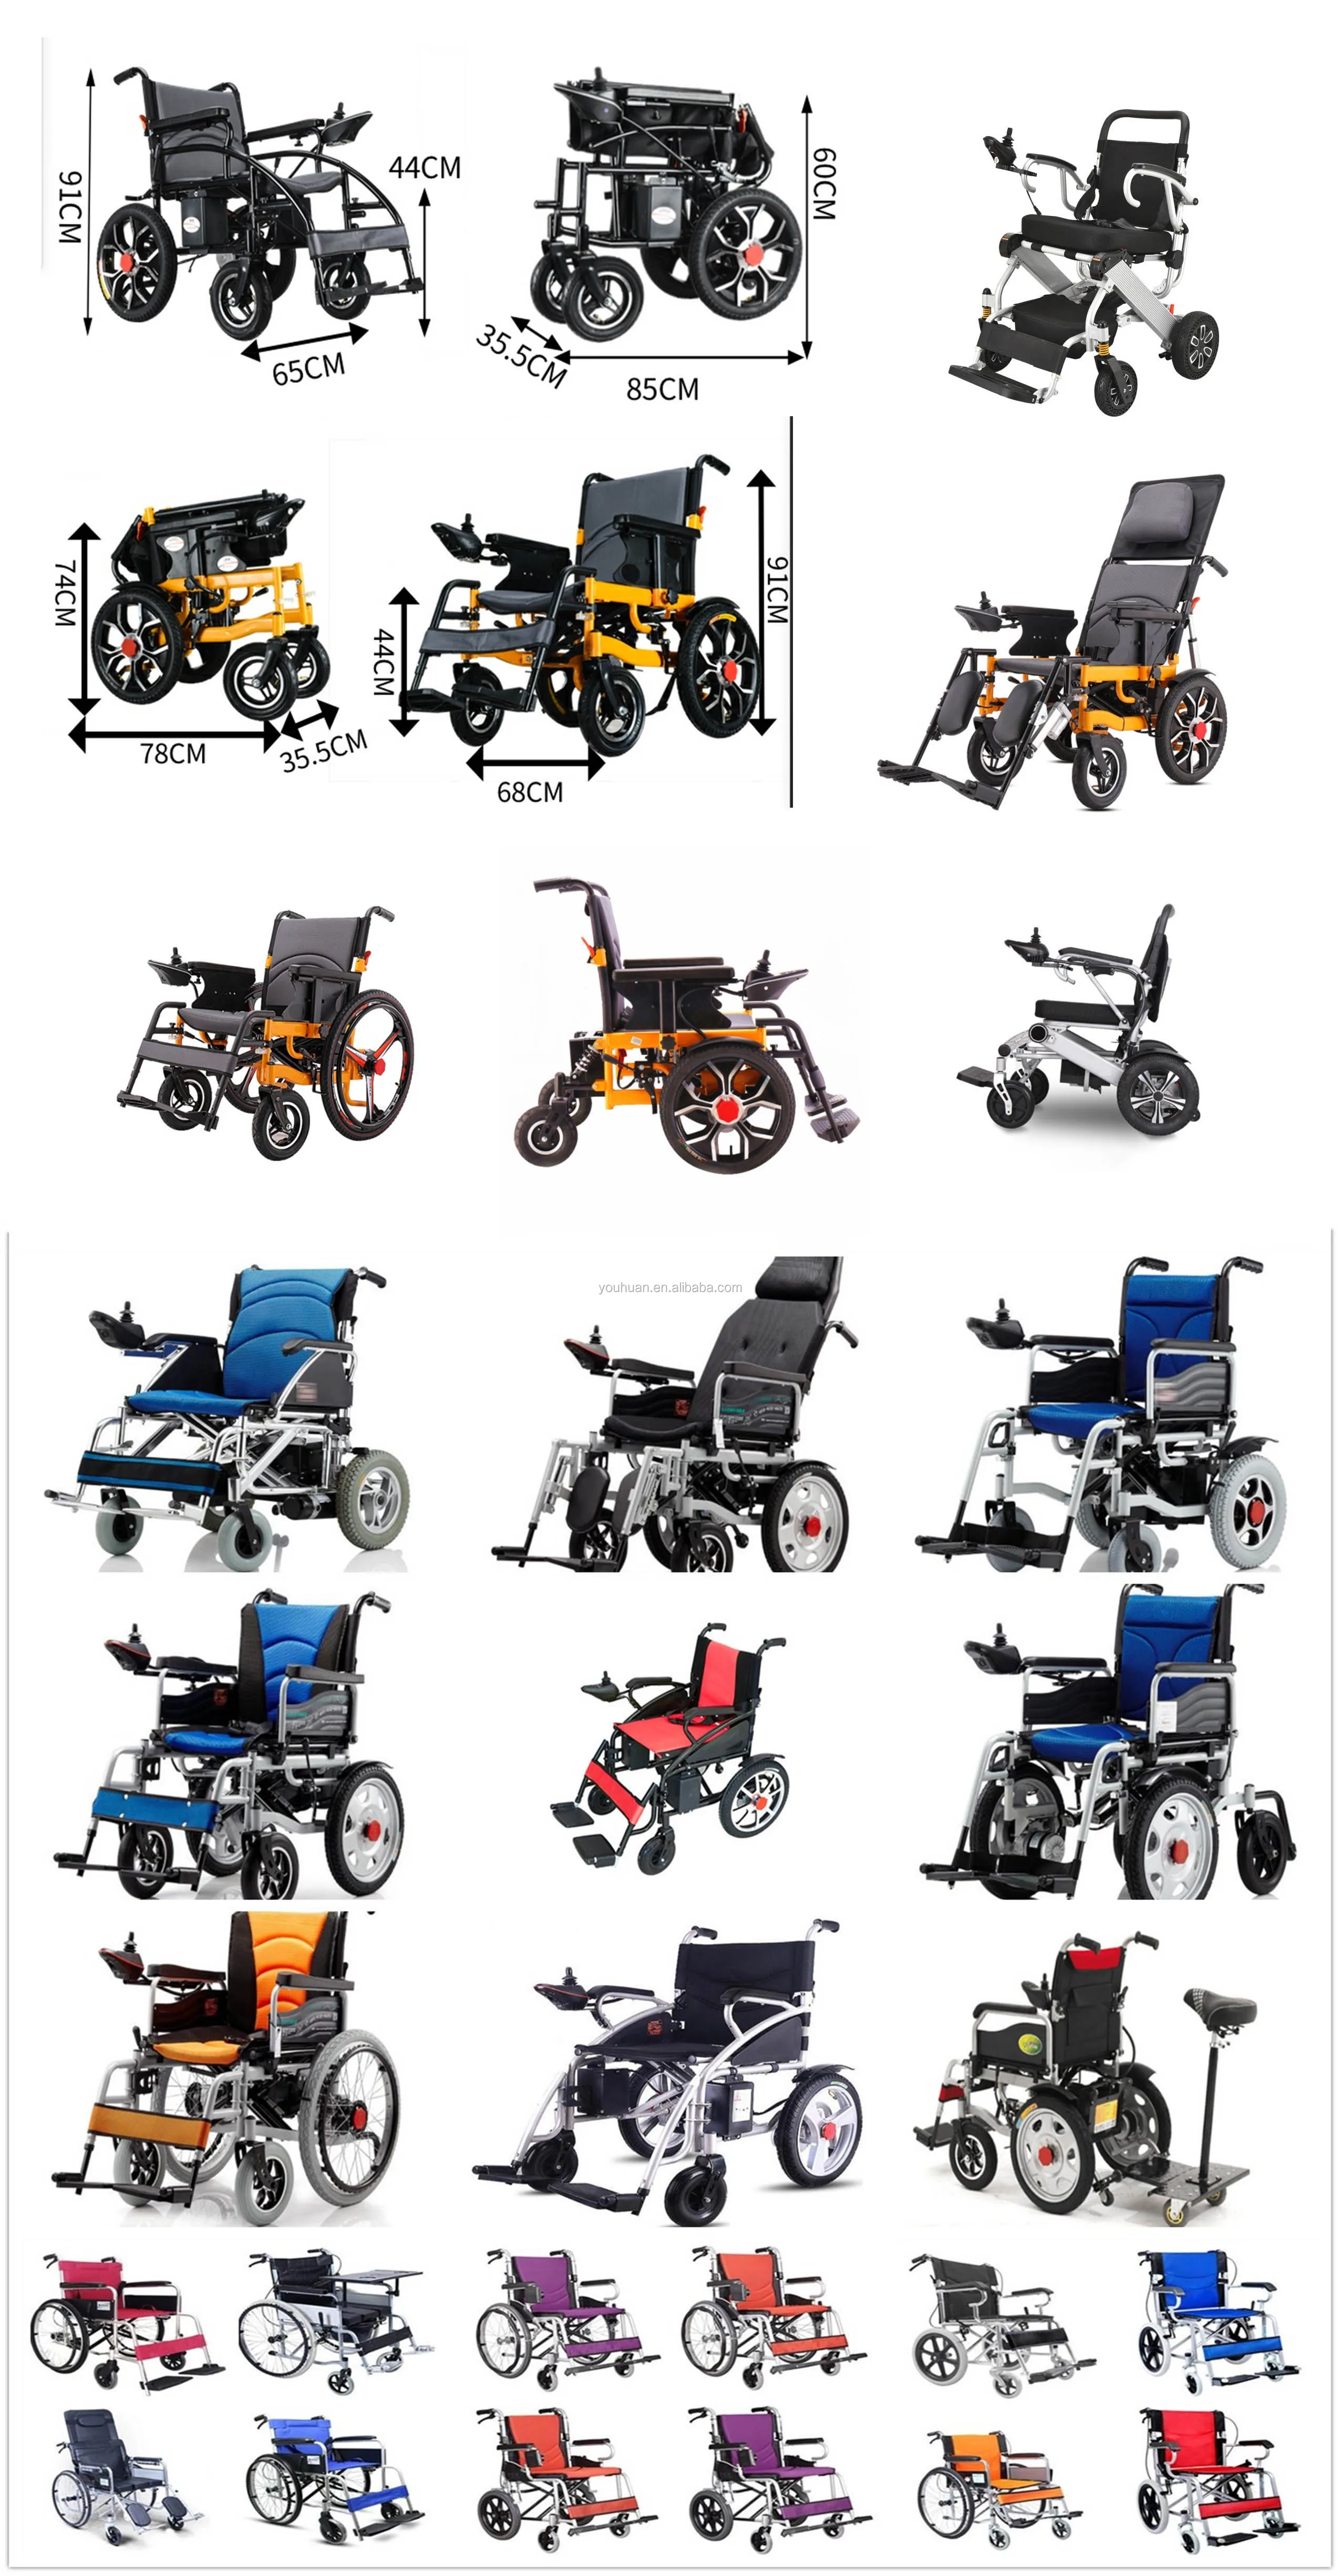 Cerebral palsy wheelchairs for cerebral palsy children with low price and cerebral palsy wheelchairs for adults